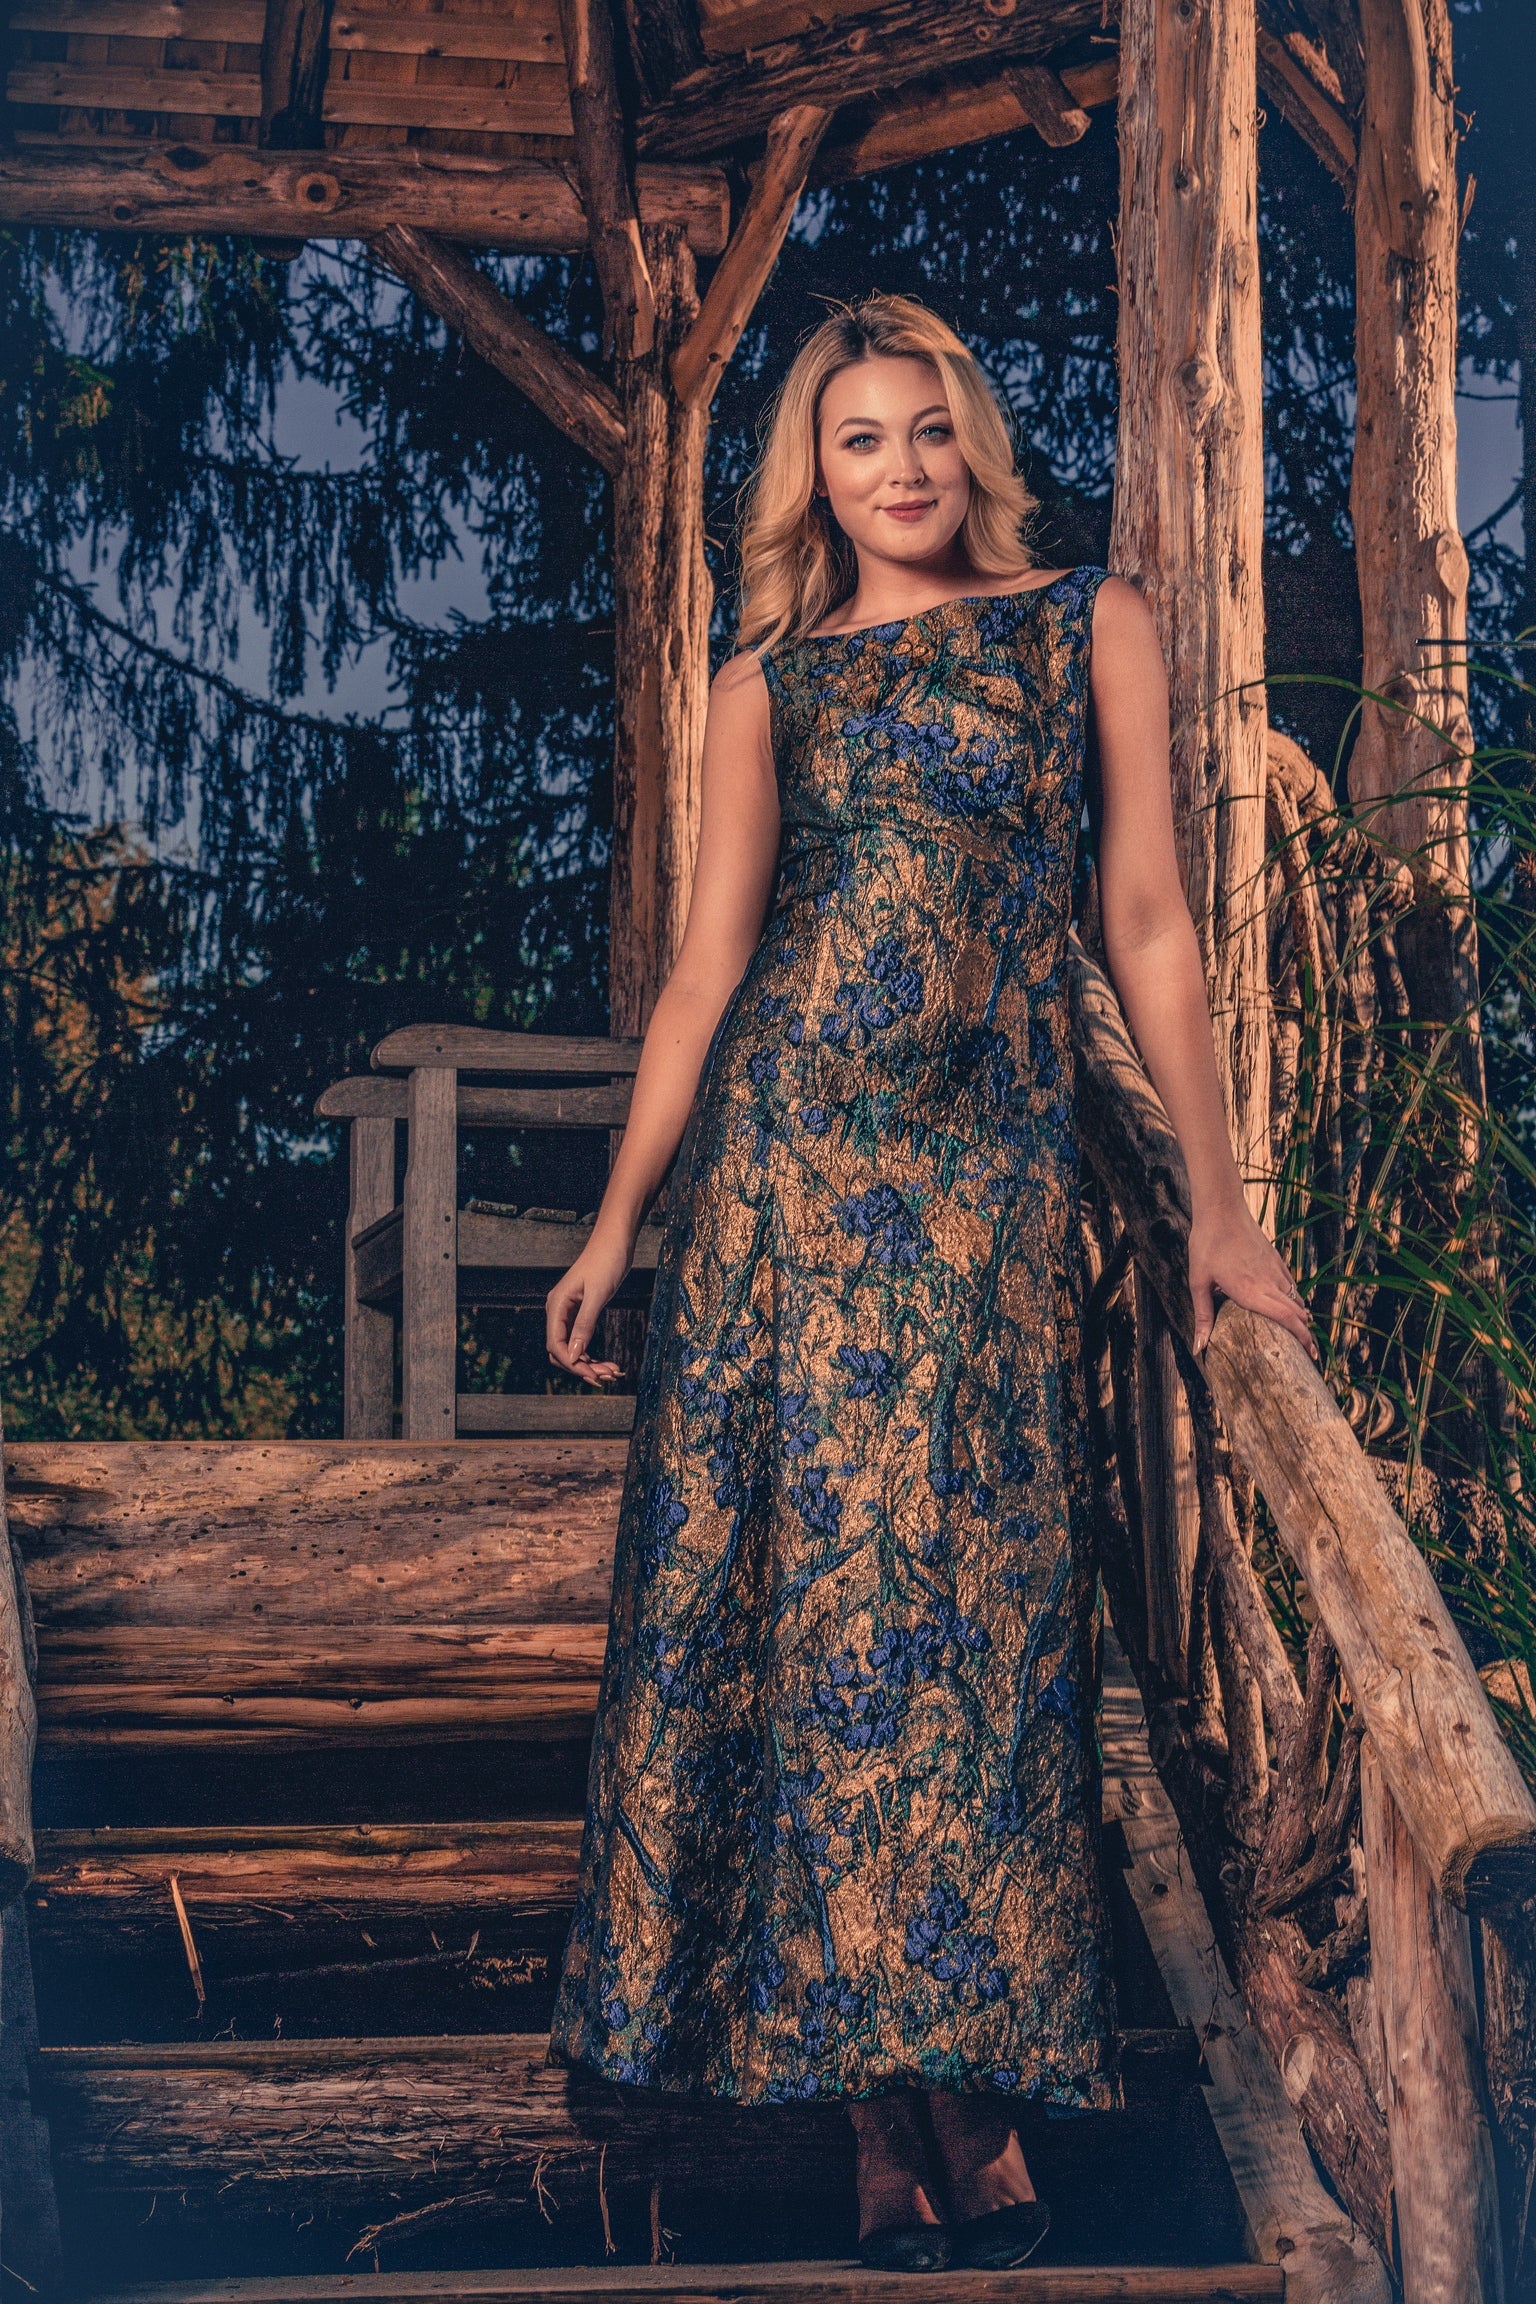 anna nieman designer dress Boston. A dress from Swiss metallic brocade, in dark gold and blue shades. The perfect gown for your special evening!